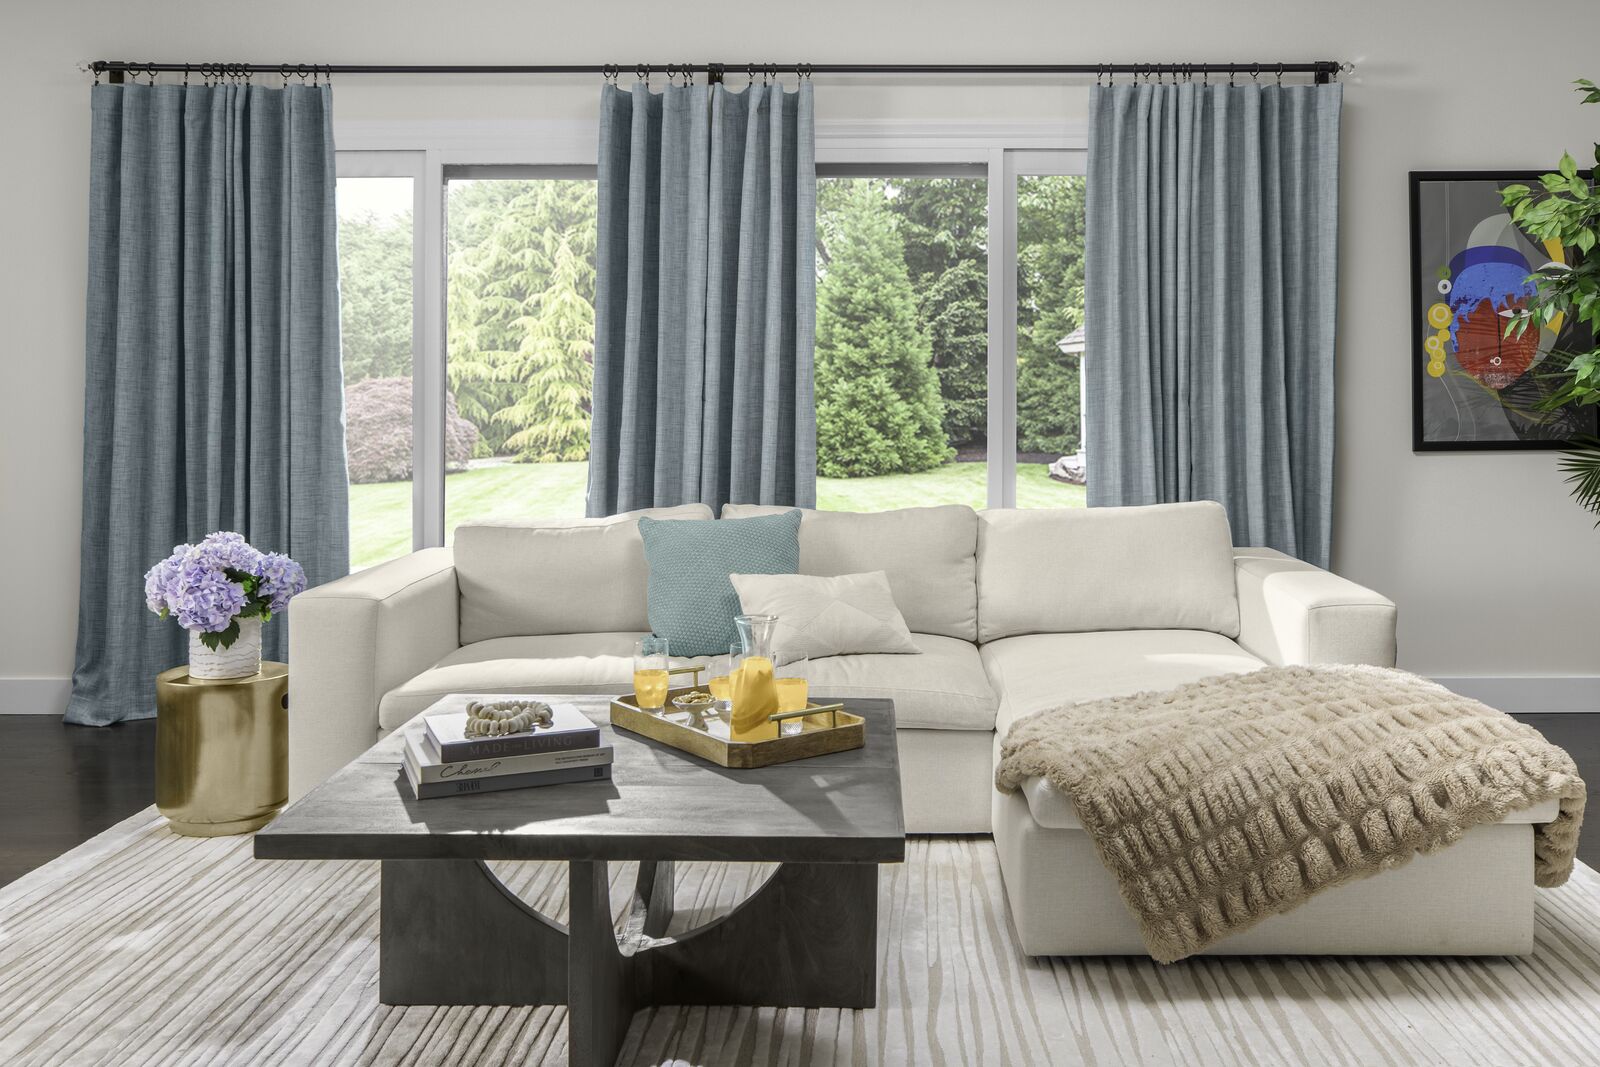 A modern living room features beautiful light teal drapery on a large window.